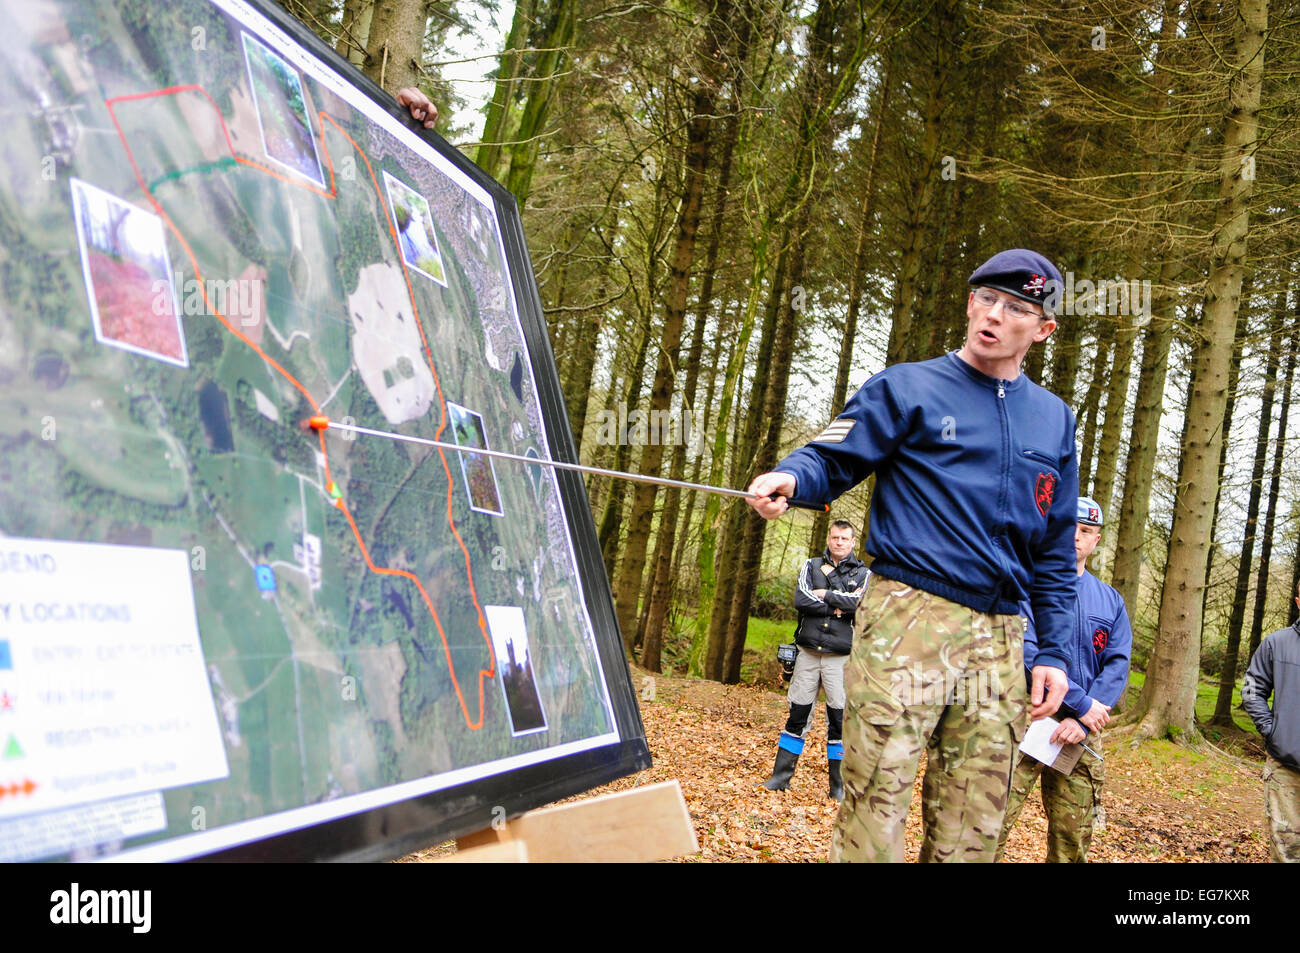 Bangor, Northern Ireland. 18th February, 2015. A sergeant major gives instruction to soldiers in advance of an exercise using a pointer and a map. Credit:  Stephen Barnes/Alamy Live News Stock Photo